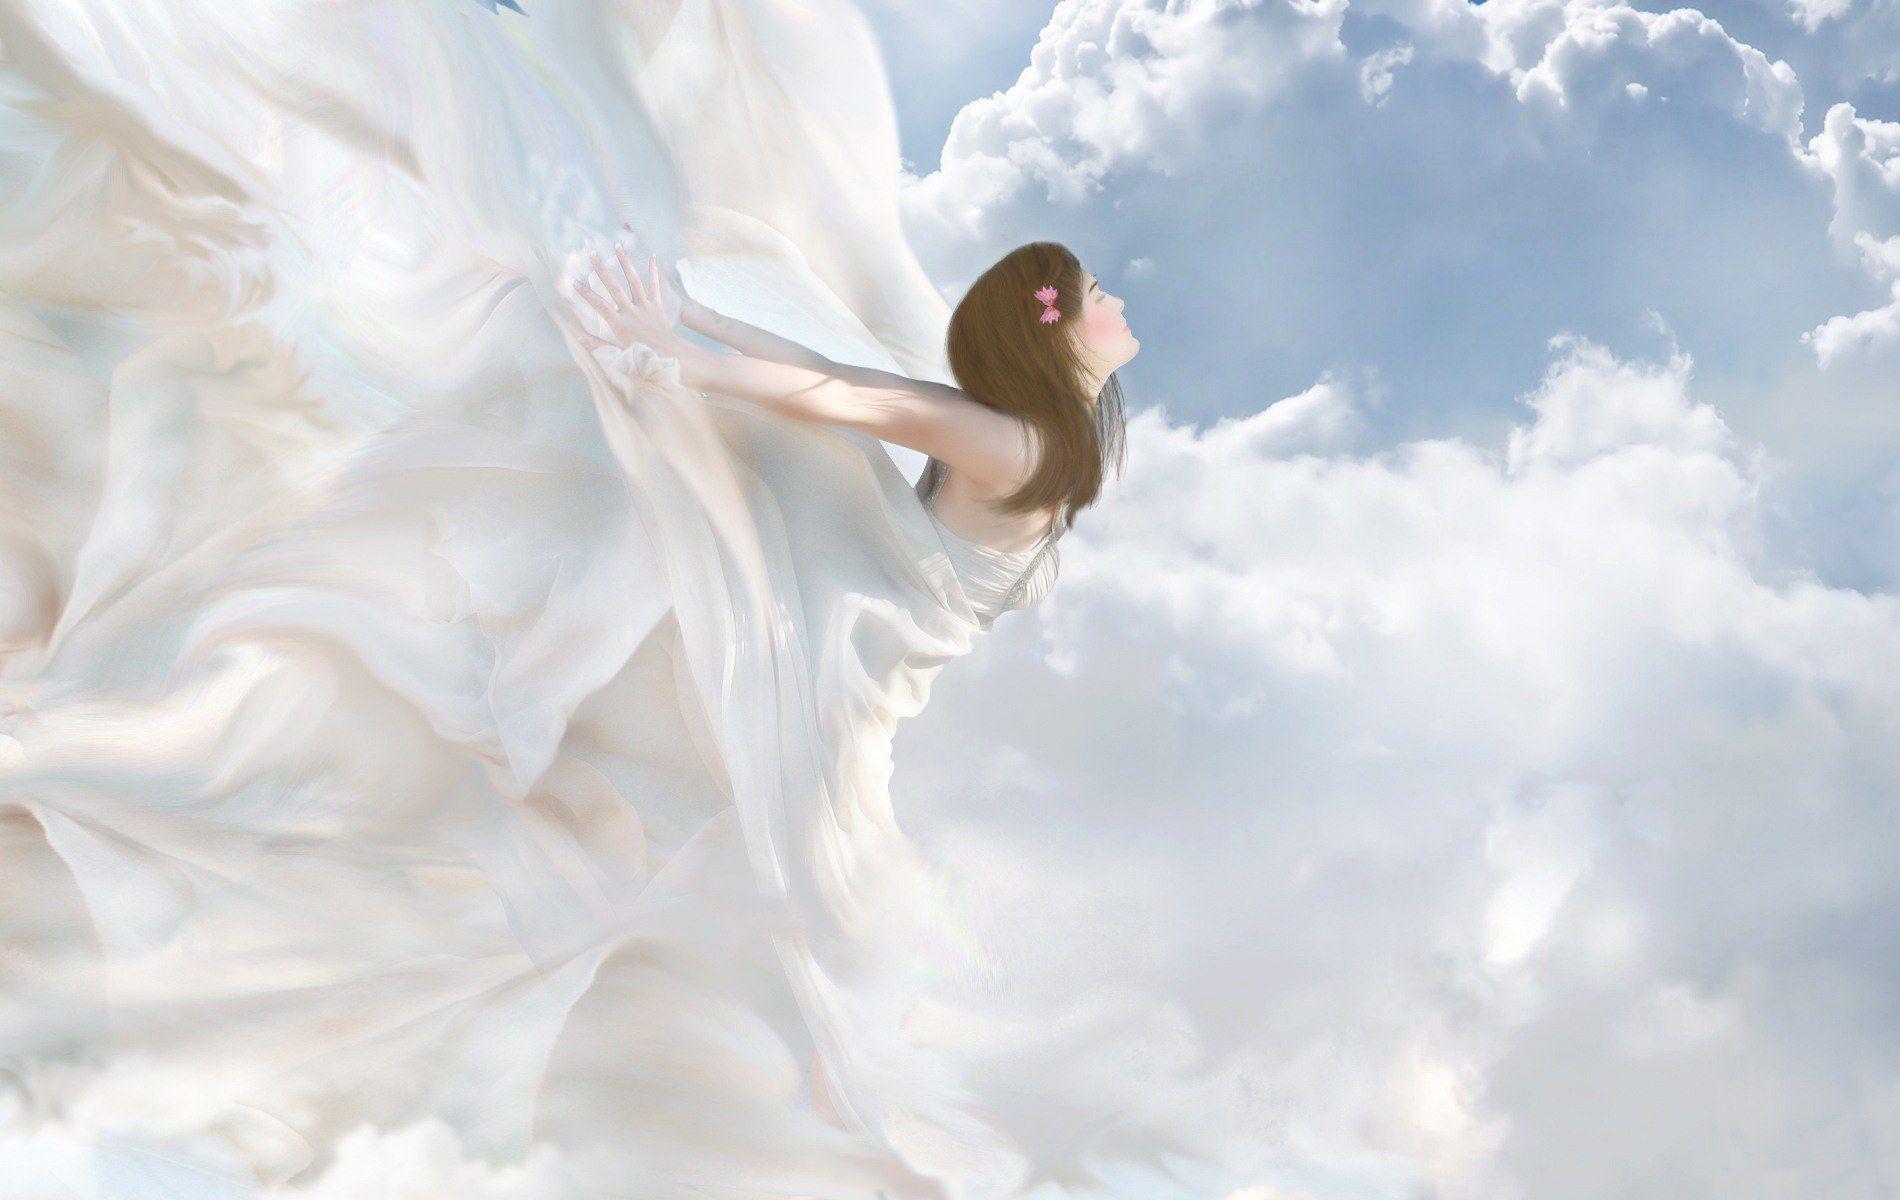 Cloudy Angel Girl wallpaper from Fairy wallpaper. Wizards